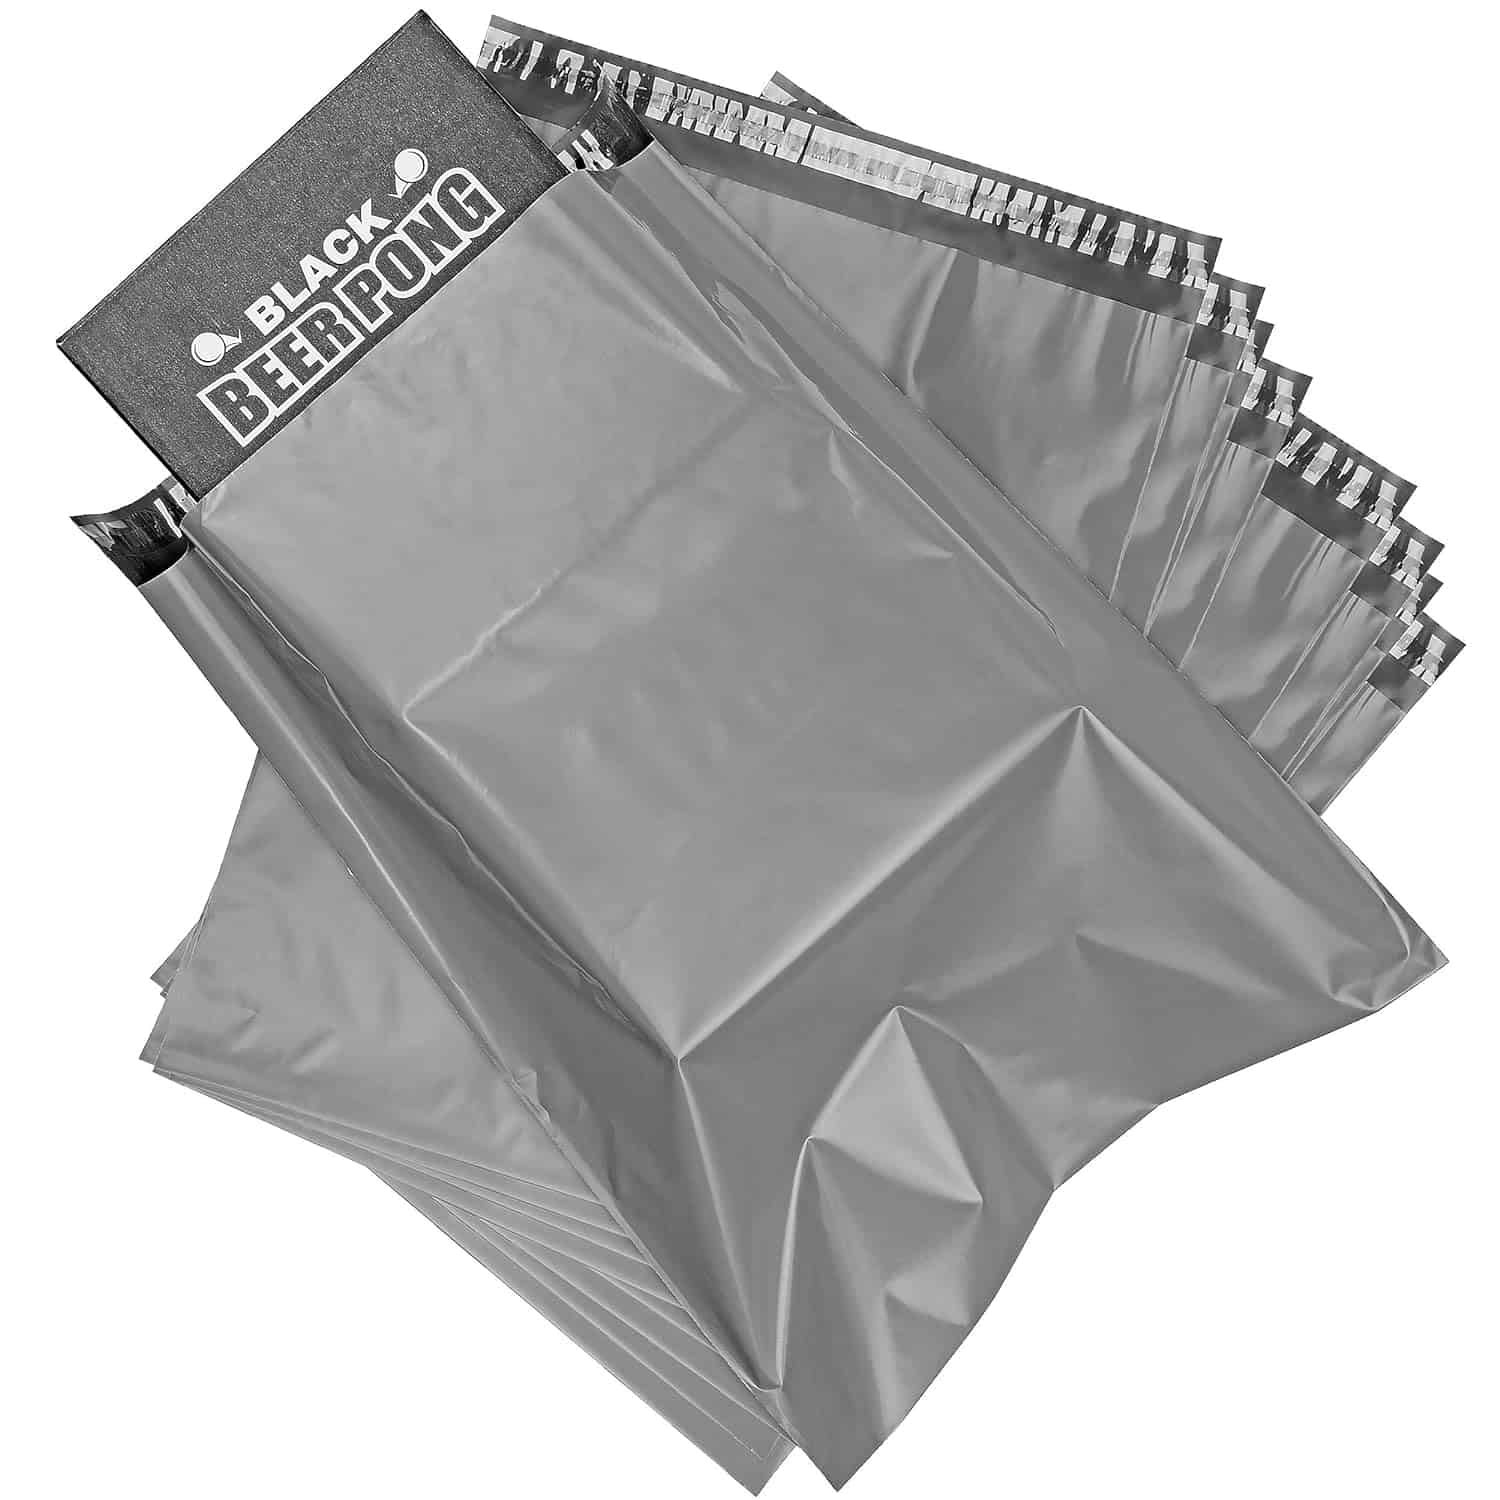 200mm x 260mm Dark Grey Plastic Poly Bags Courier Shipping